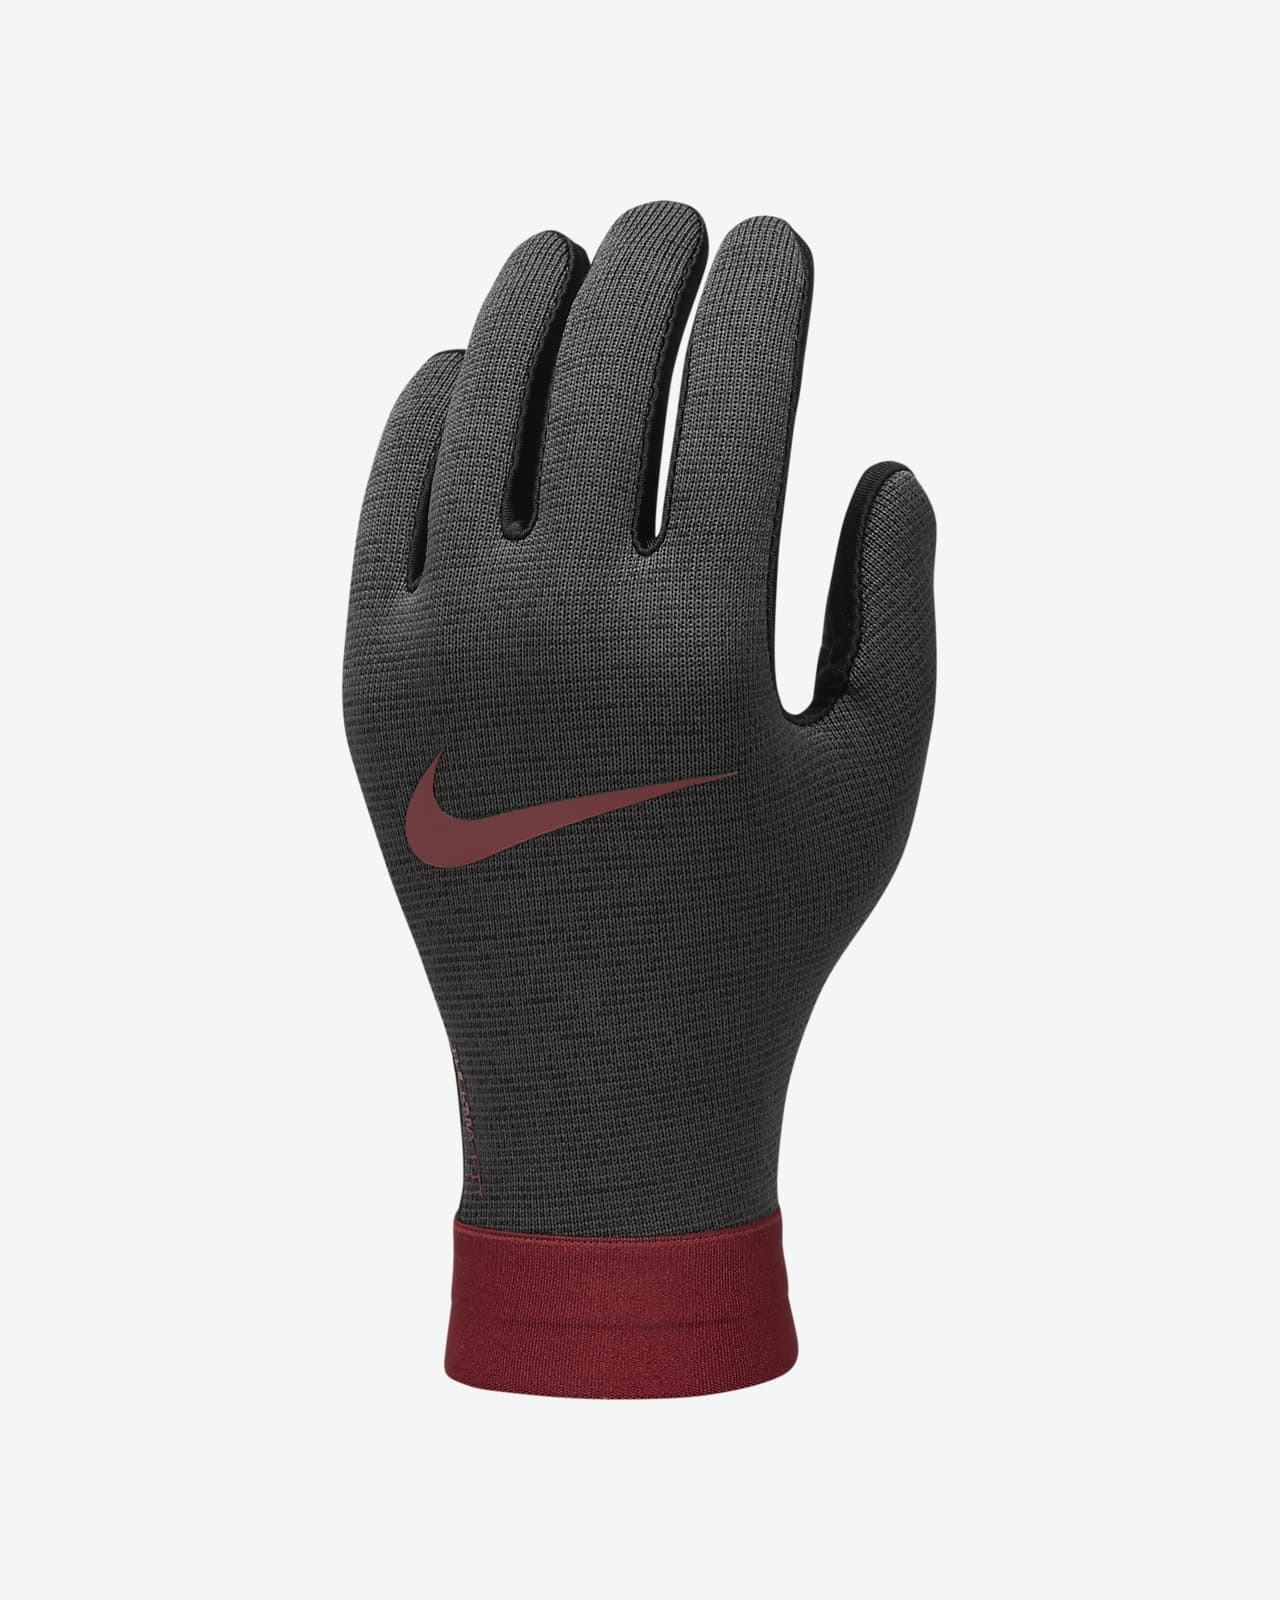 Liverpool FC Academy Guantes de fútbol Nike Therma-FIT - Niño/a